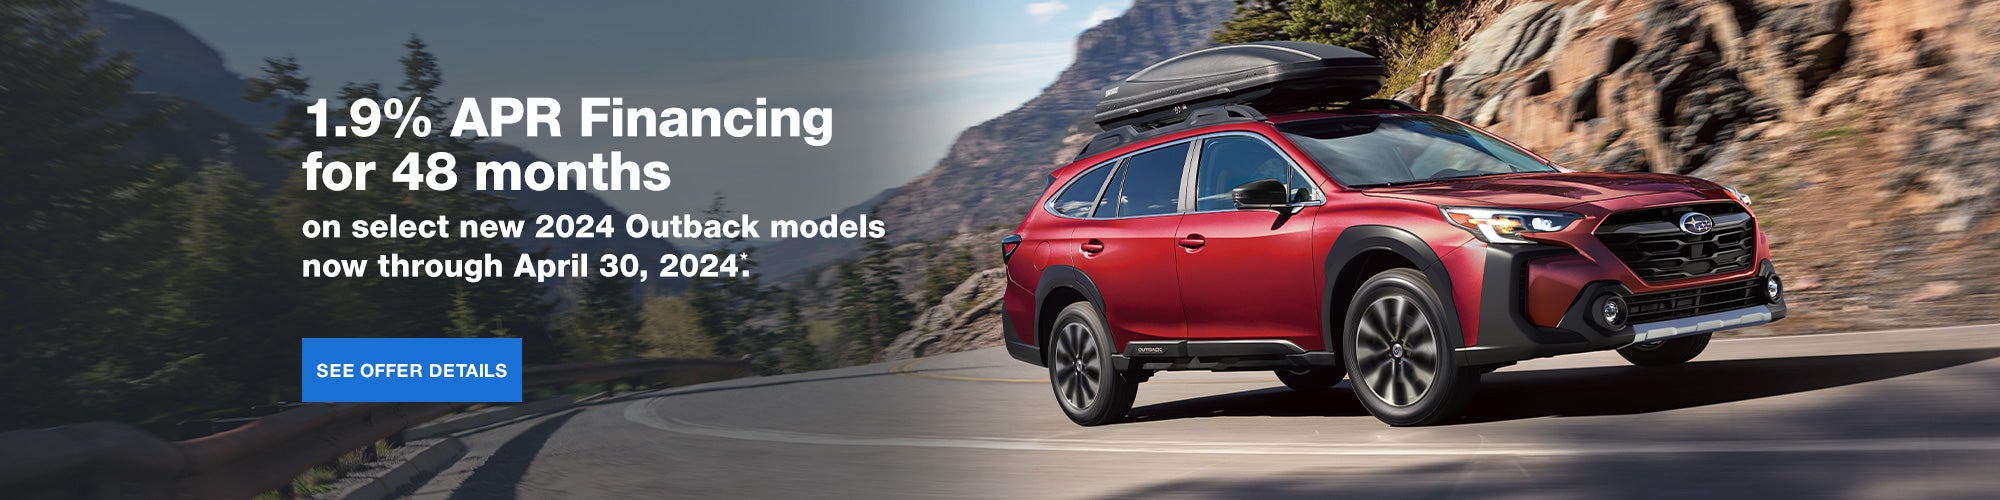 1.9% APR Financing for 48 Months | 2024 Outback